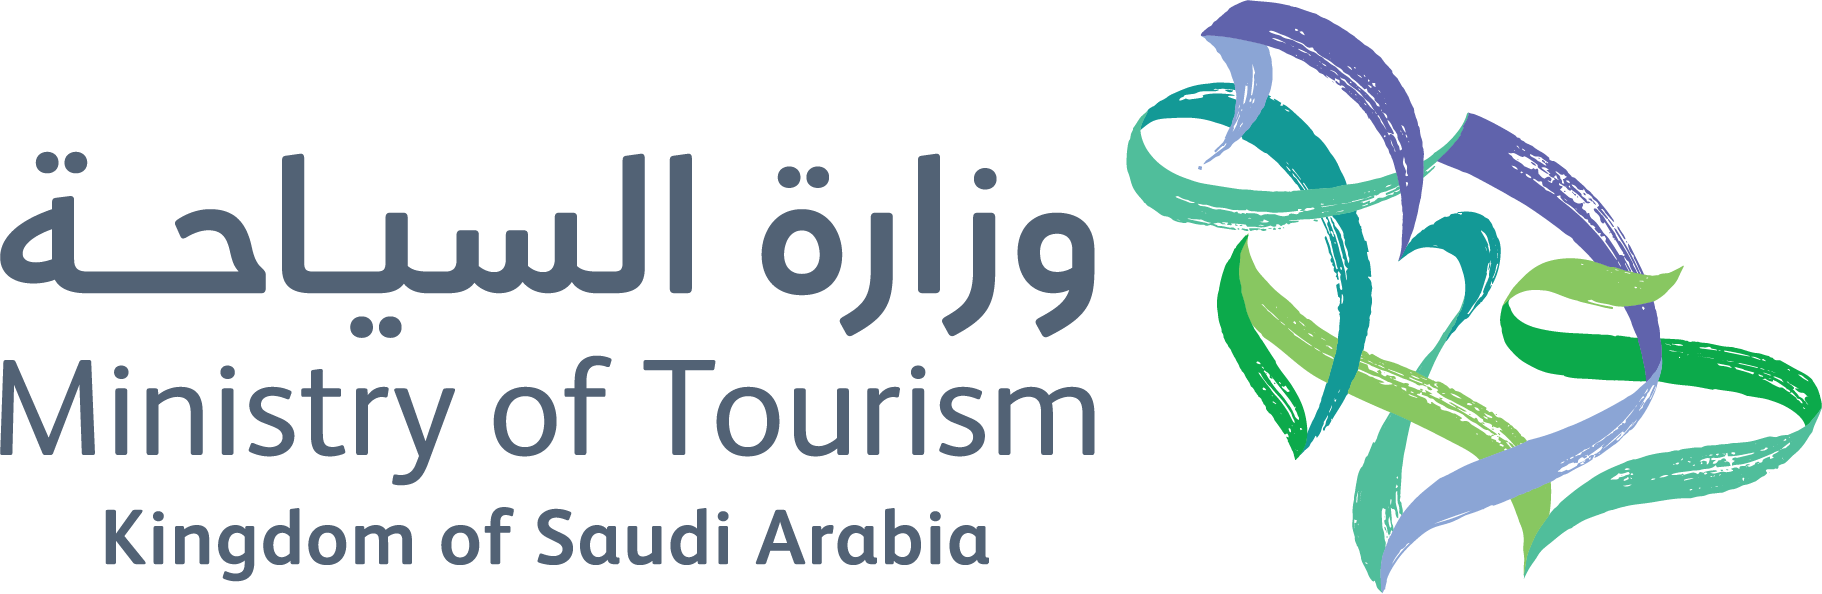 Ministry of Tourism logo